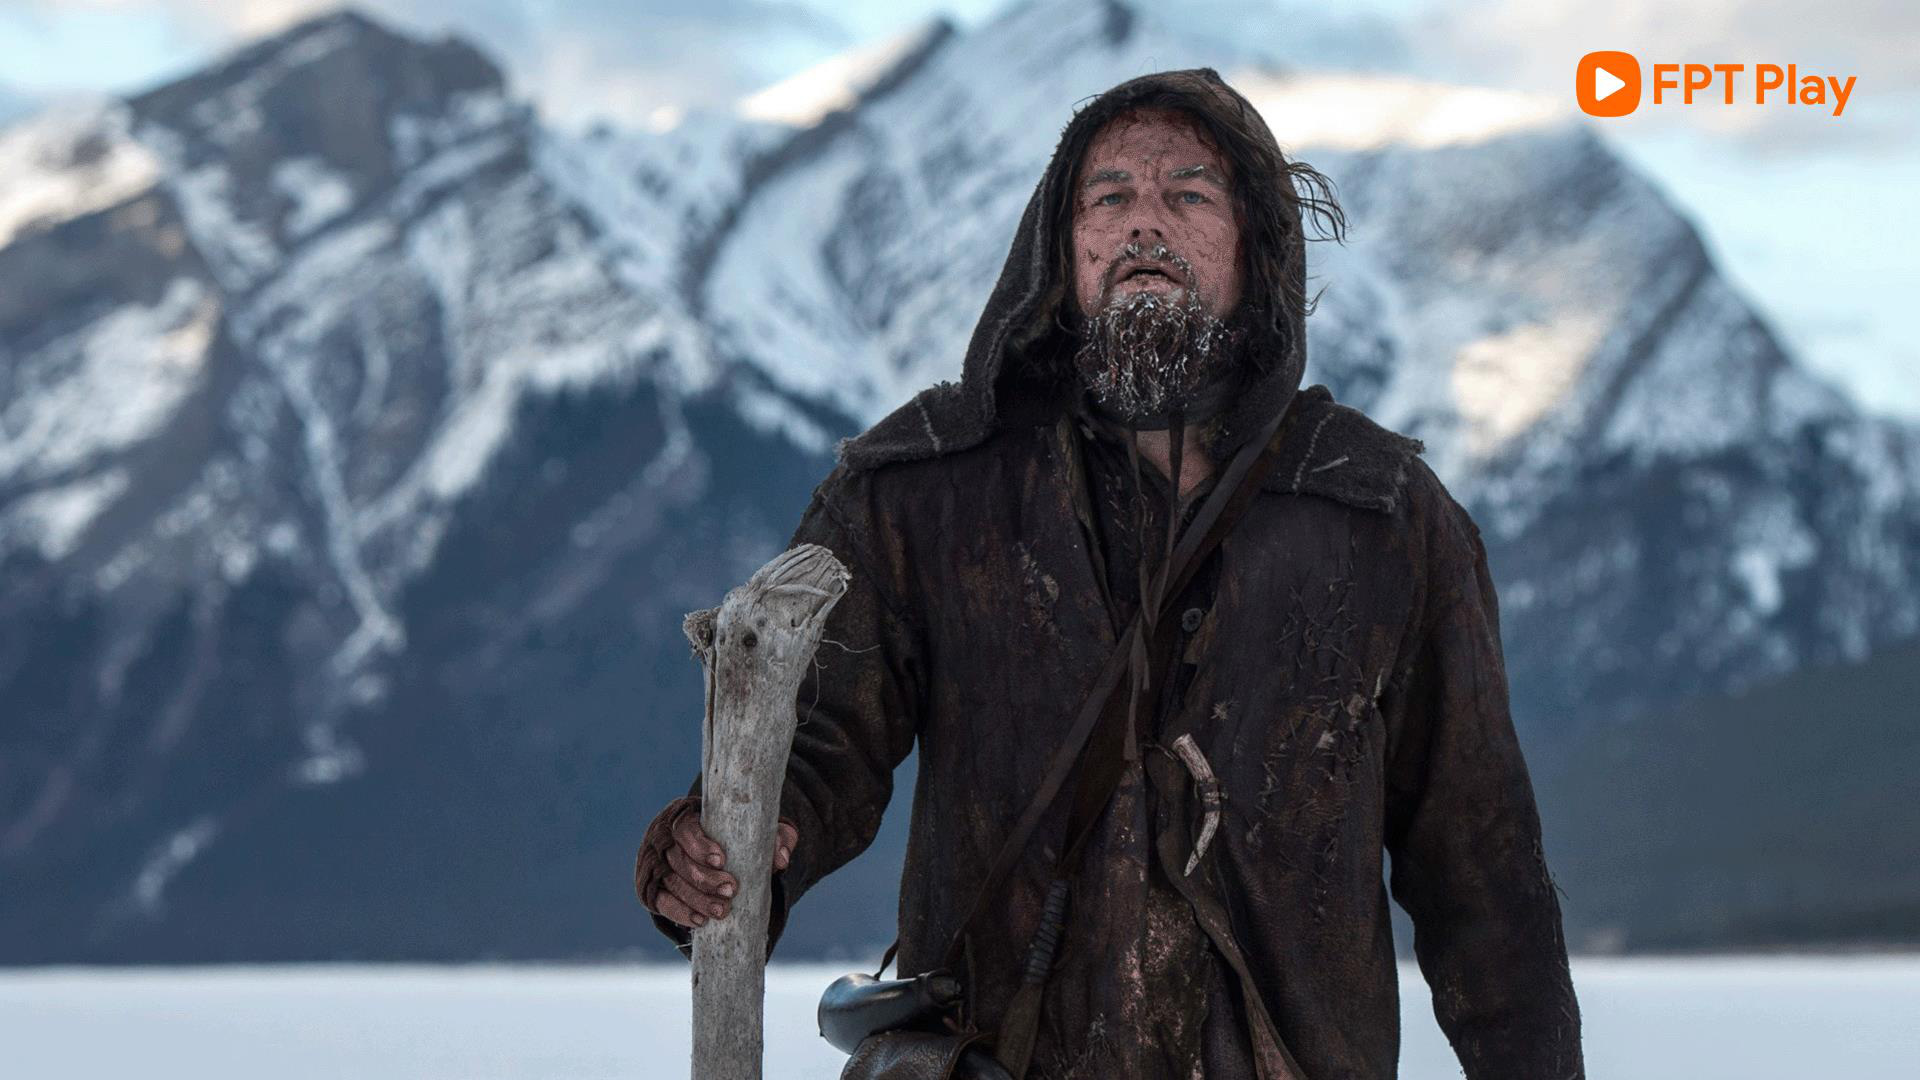 The Revenant: True survival works down to every centimeter in FPT Play - Photo 1.